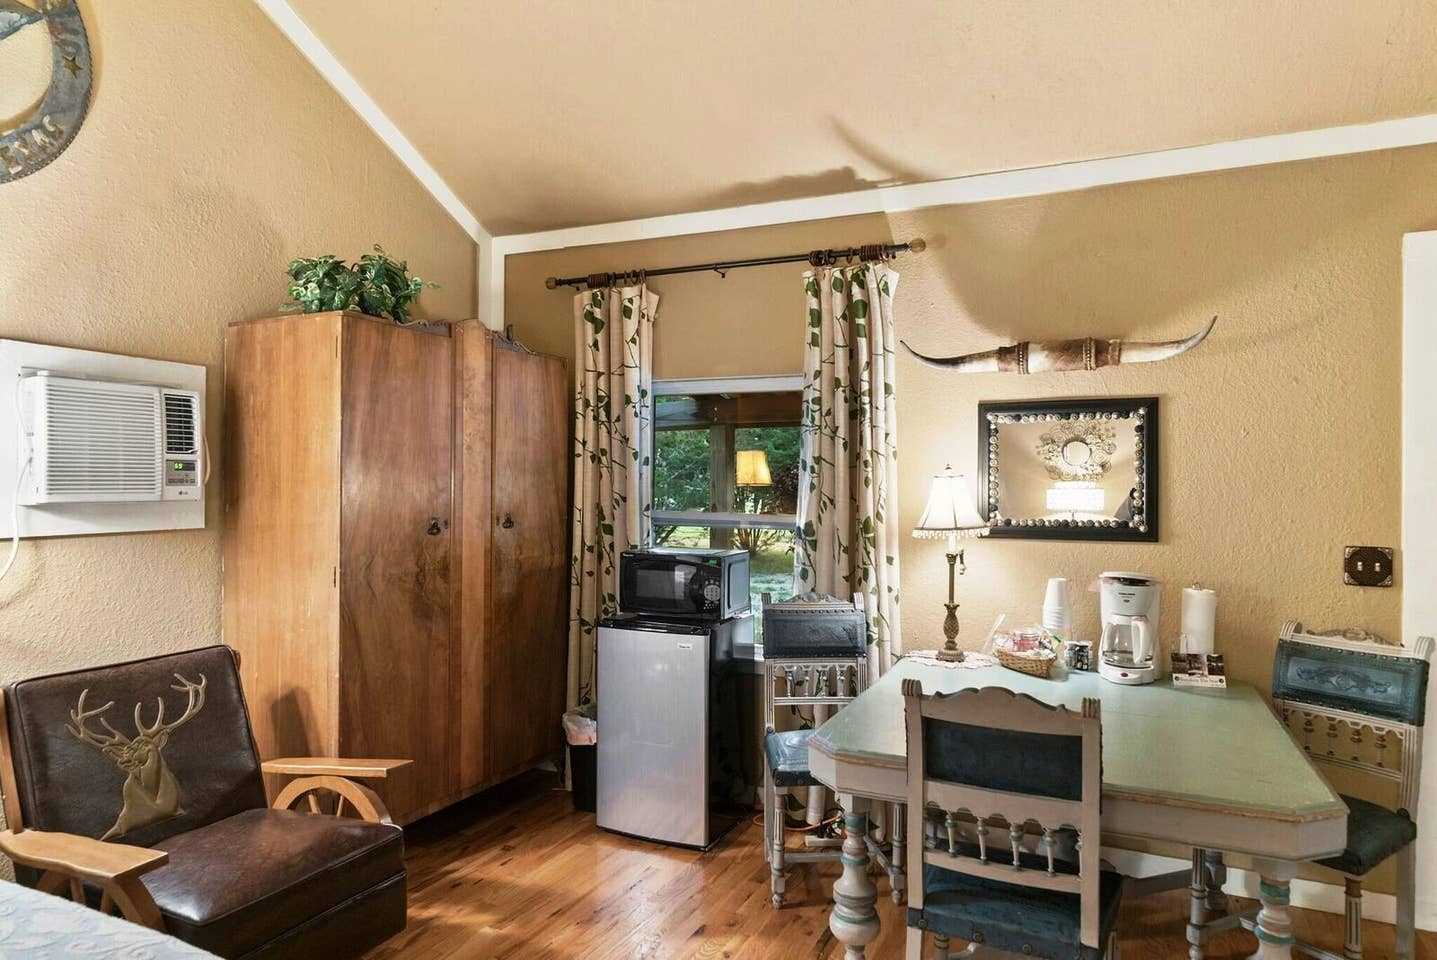                                                 Air-conditioned comfort, Wifi, and kitchenettes with complimentary coffee add those special extras to the Tin Star experience.